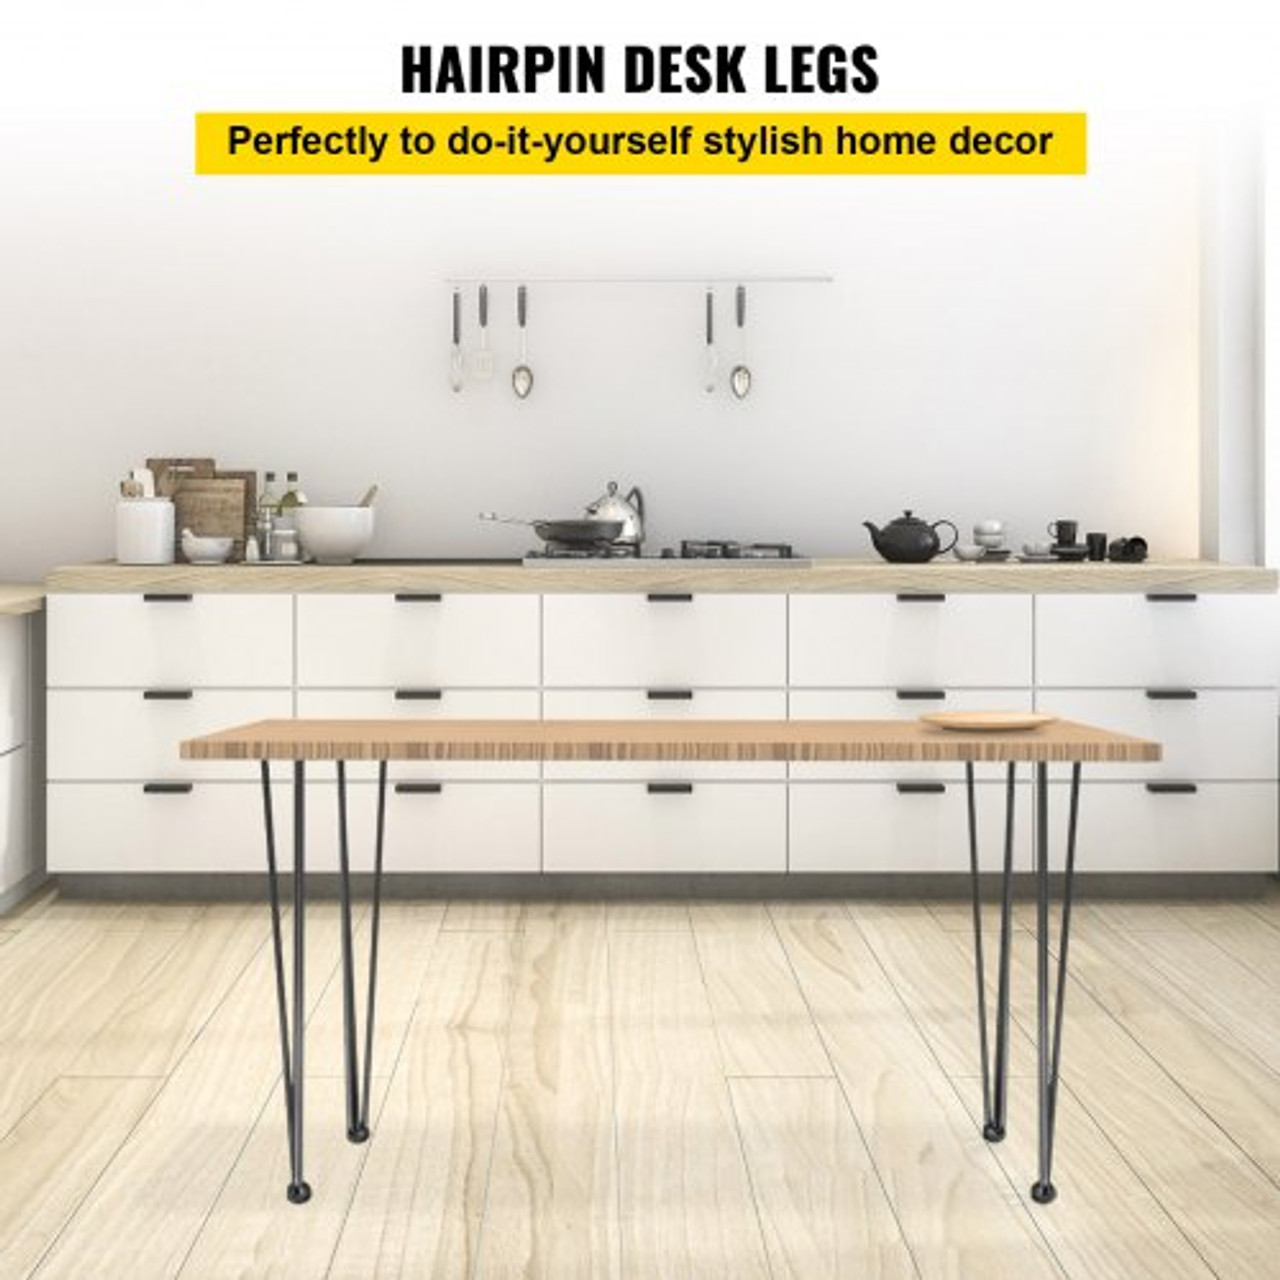 Hairpin Table Legs 28" Black Set of 4 Desk Legs 880lbs Load Capacity (Each 220lbs) Hairpin Desk Legs 3 Rods for Bench Desk Dining End Table Chairs Carbon Steel DIY Heavy Duty Furniture Legs